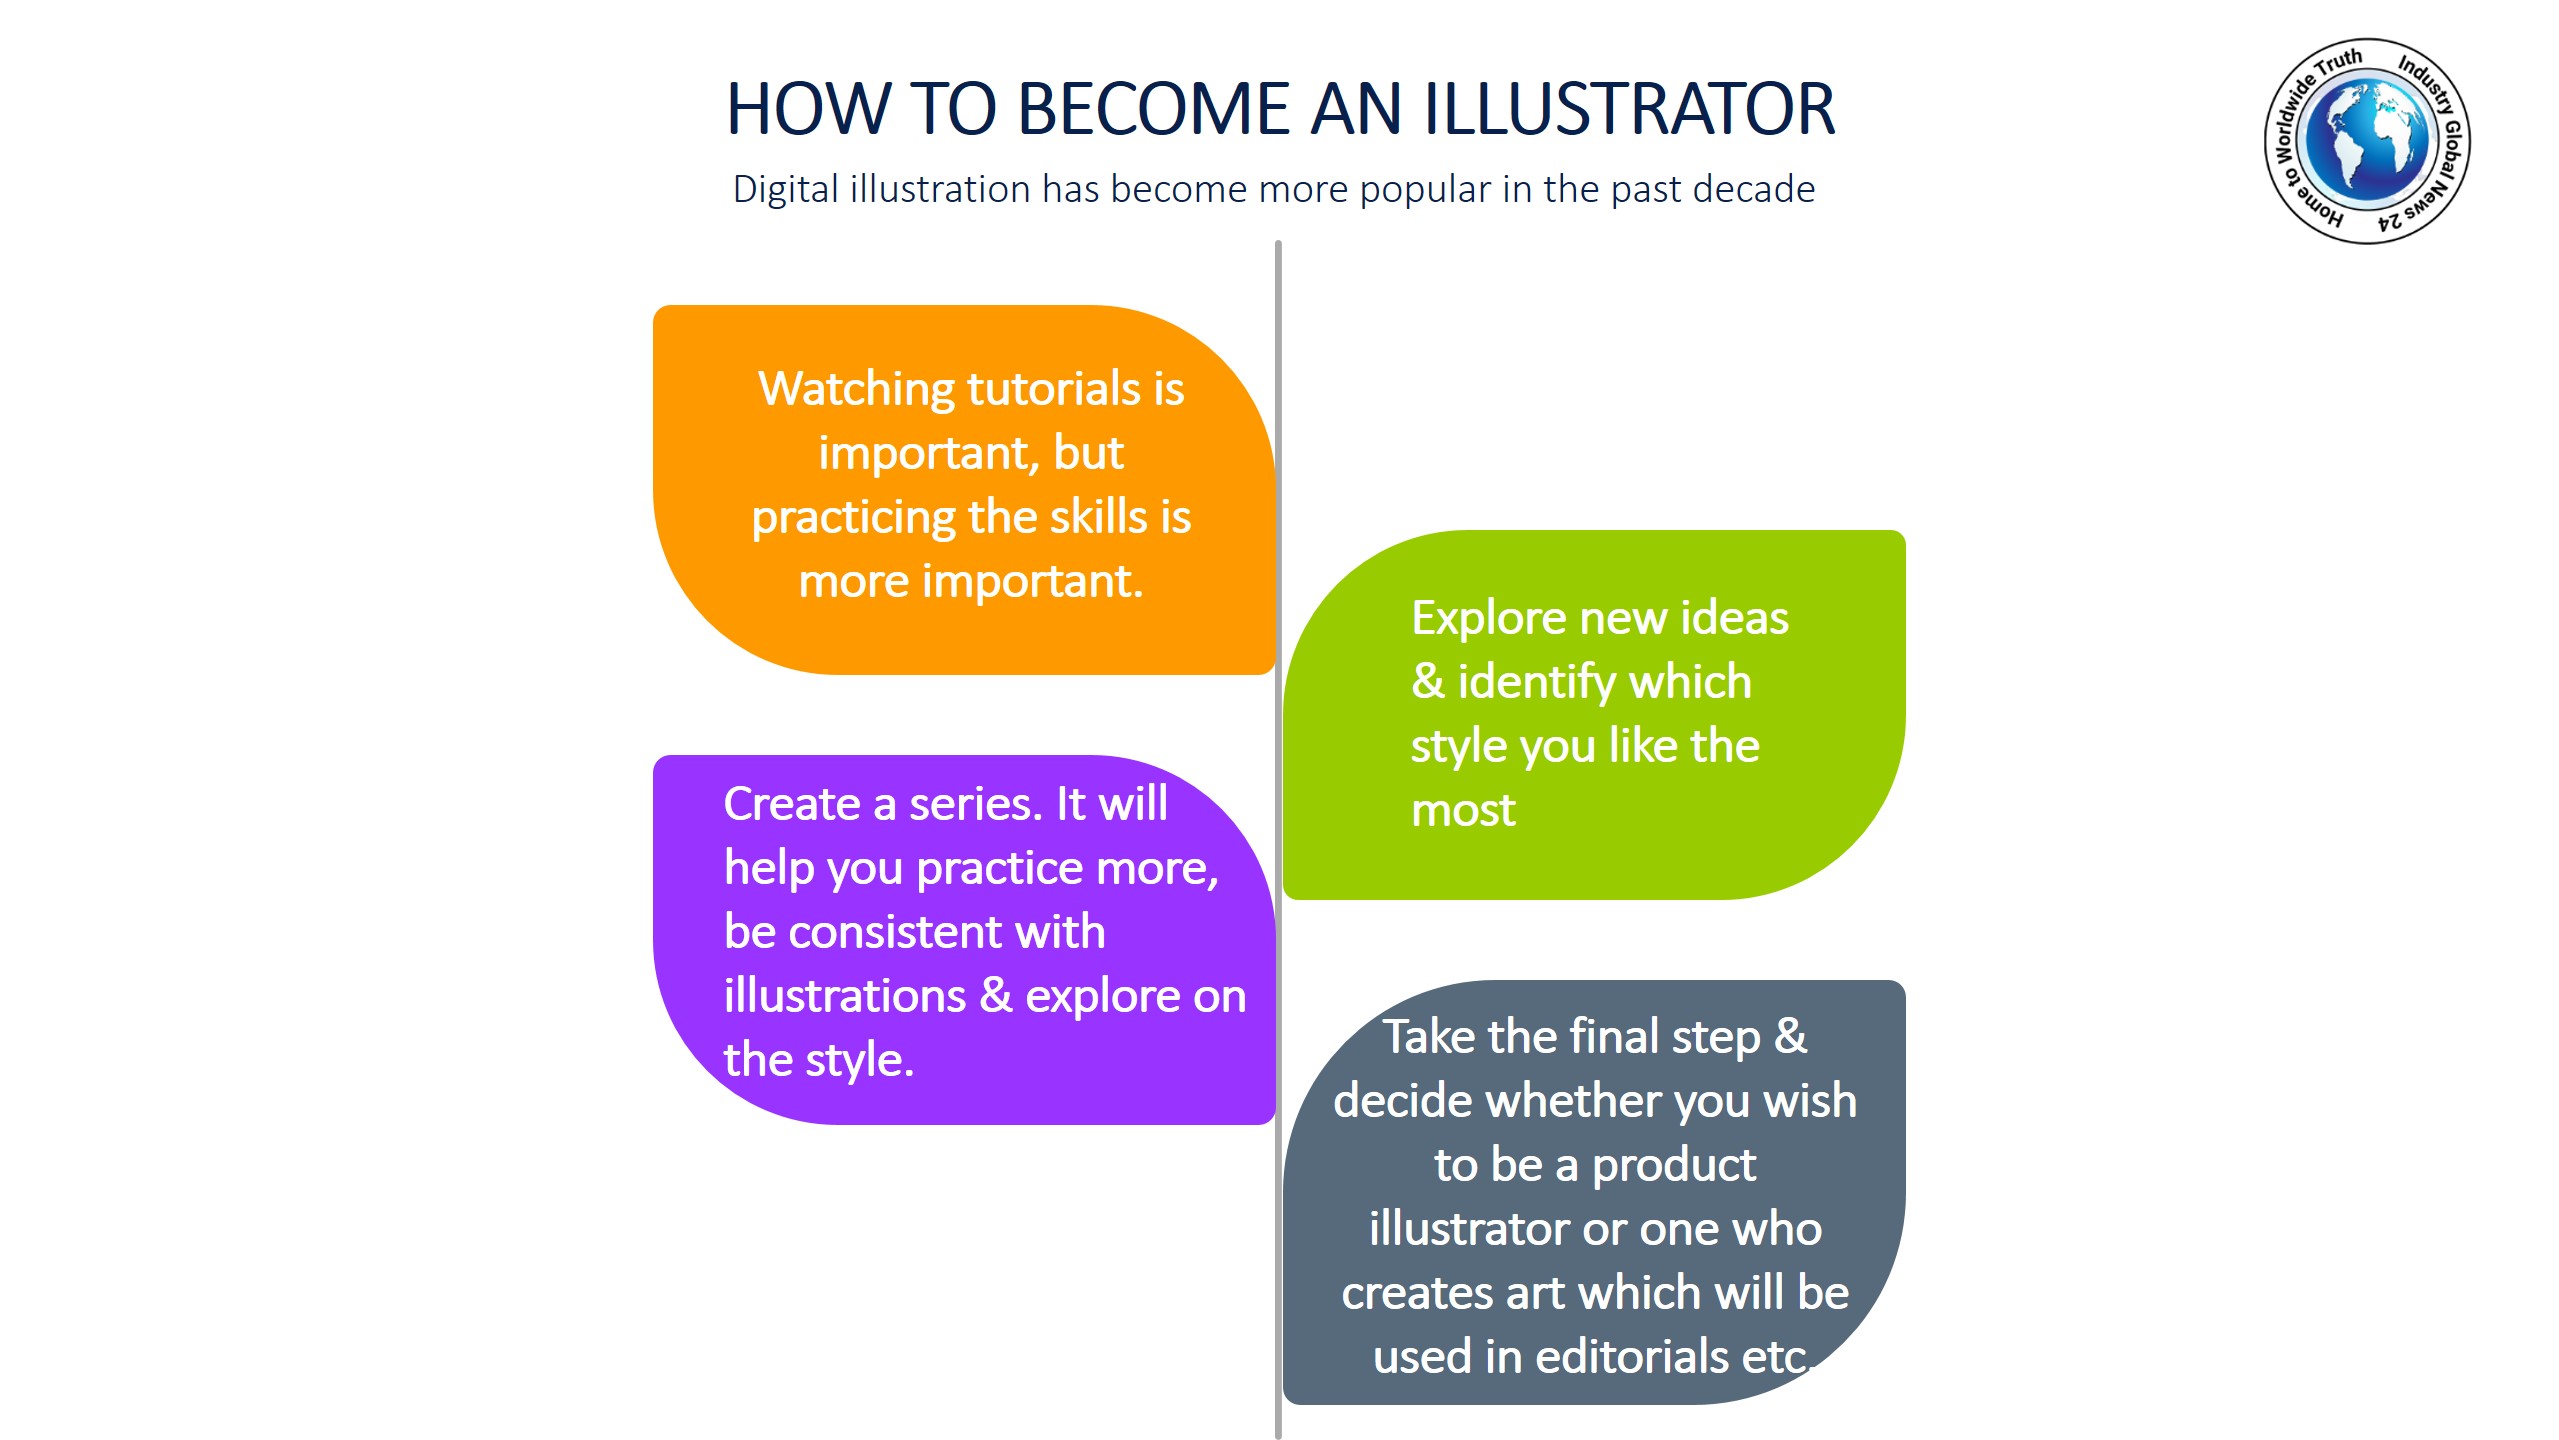 How to become an illustrator